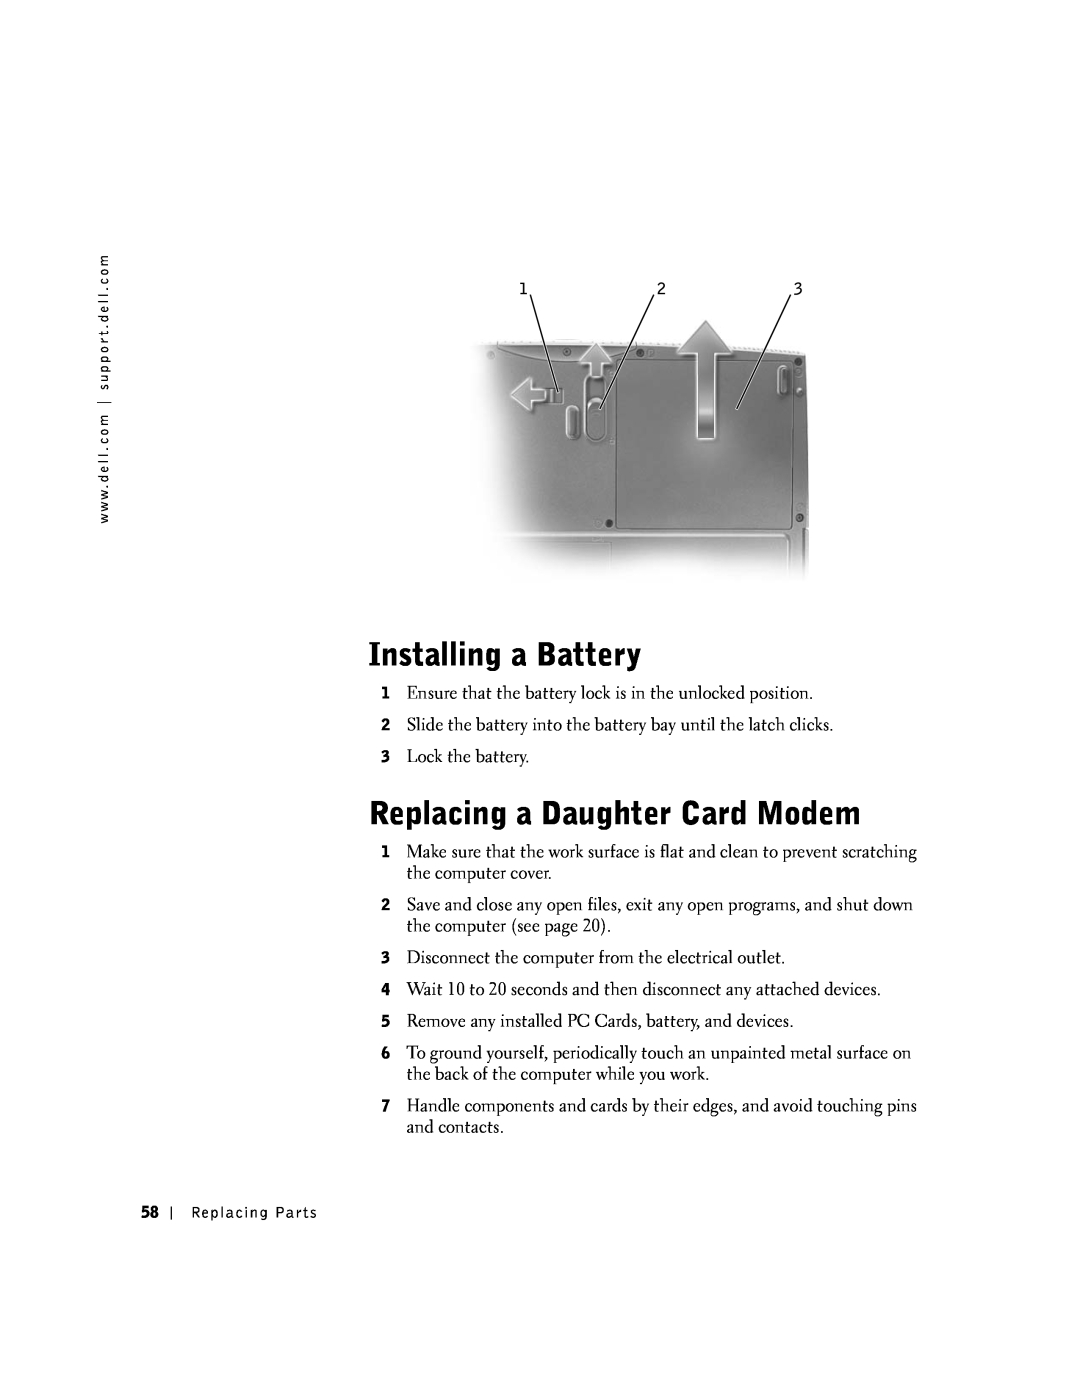 Dell 100N owner manual Installing a Battery, Replacing a Daughter Card Modem 